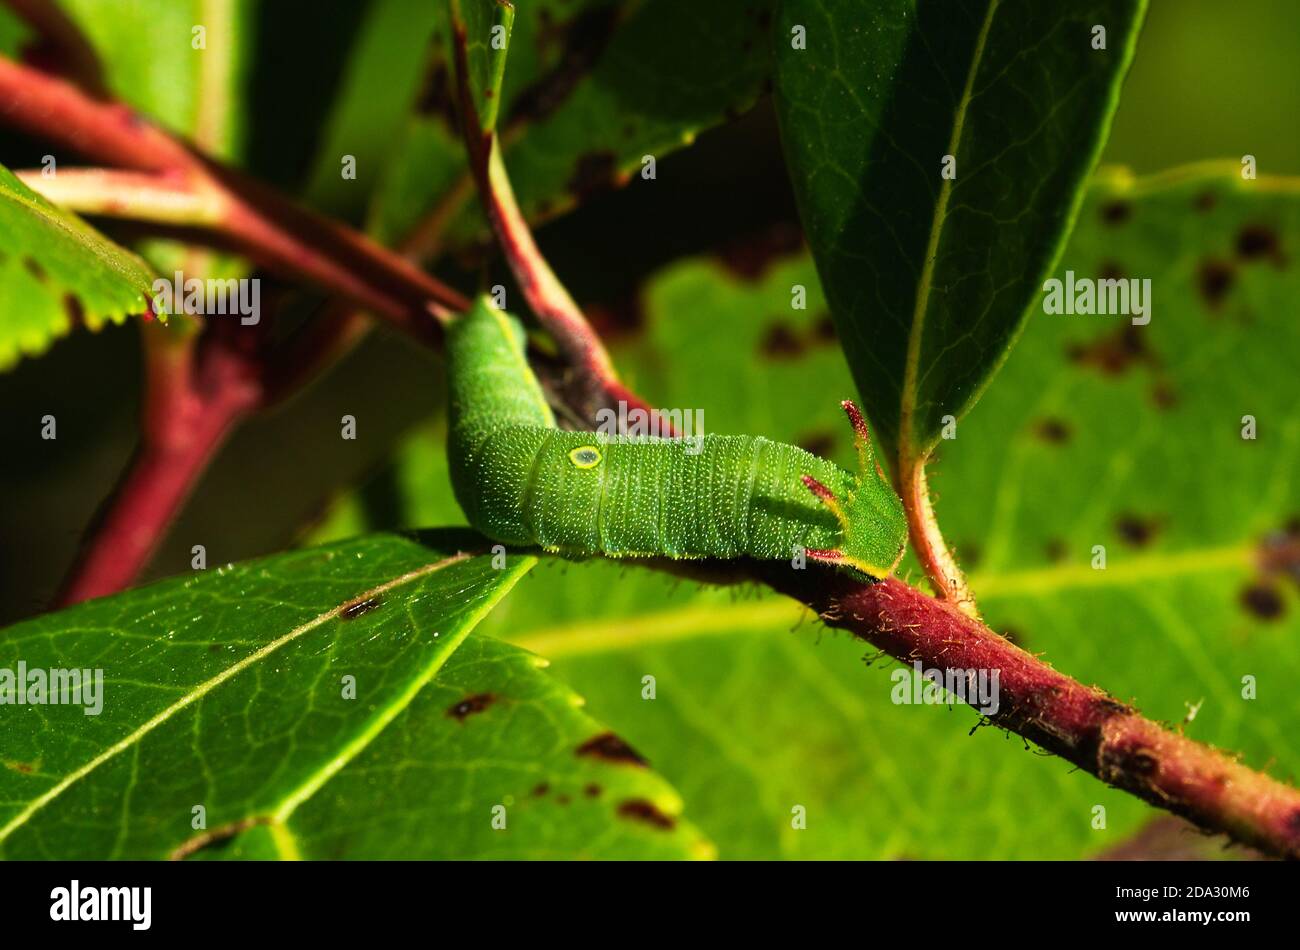 Lateral perspective view of Two tailed pasha (aka foxy emperor) caterpillar (Charaxes jasius) on twigs and green leaves of its host plant: Strawberry Stock Photo